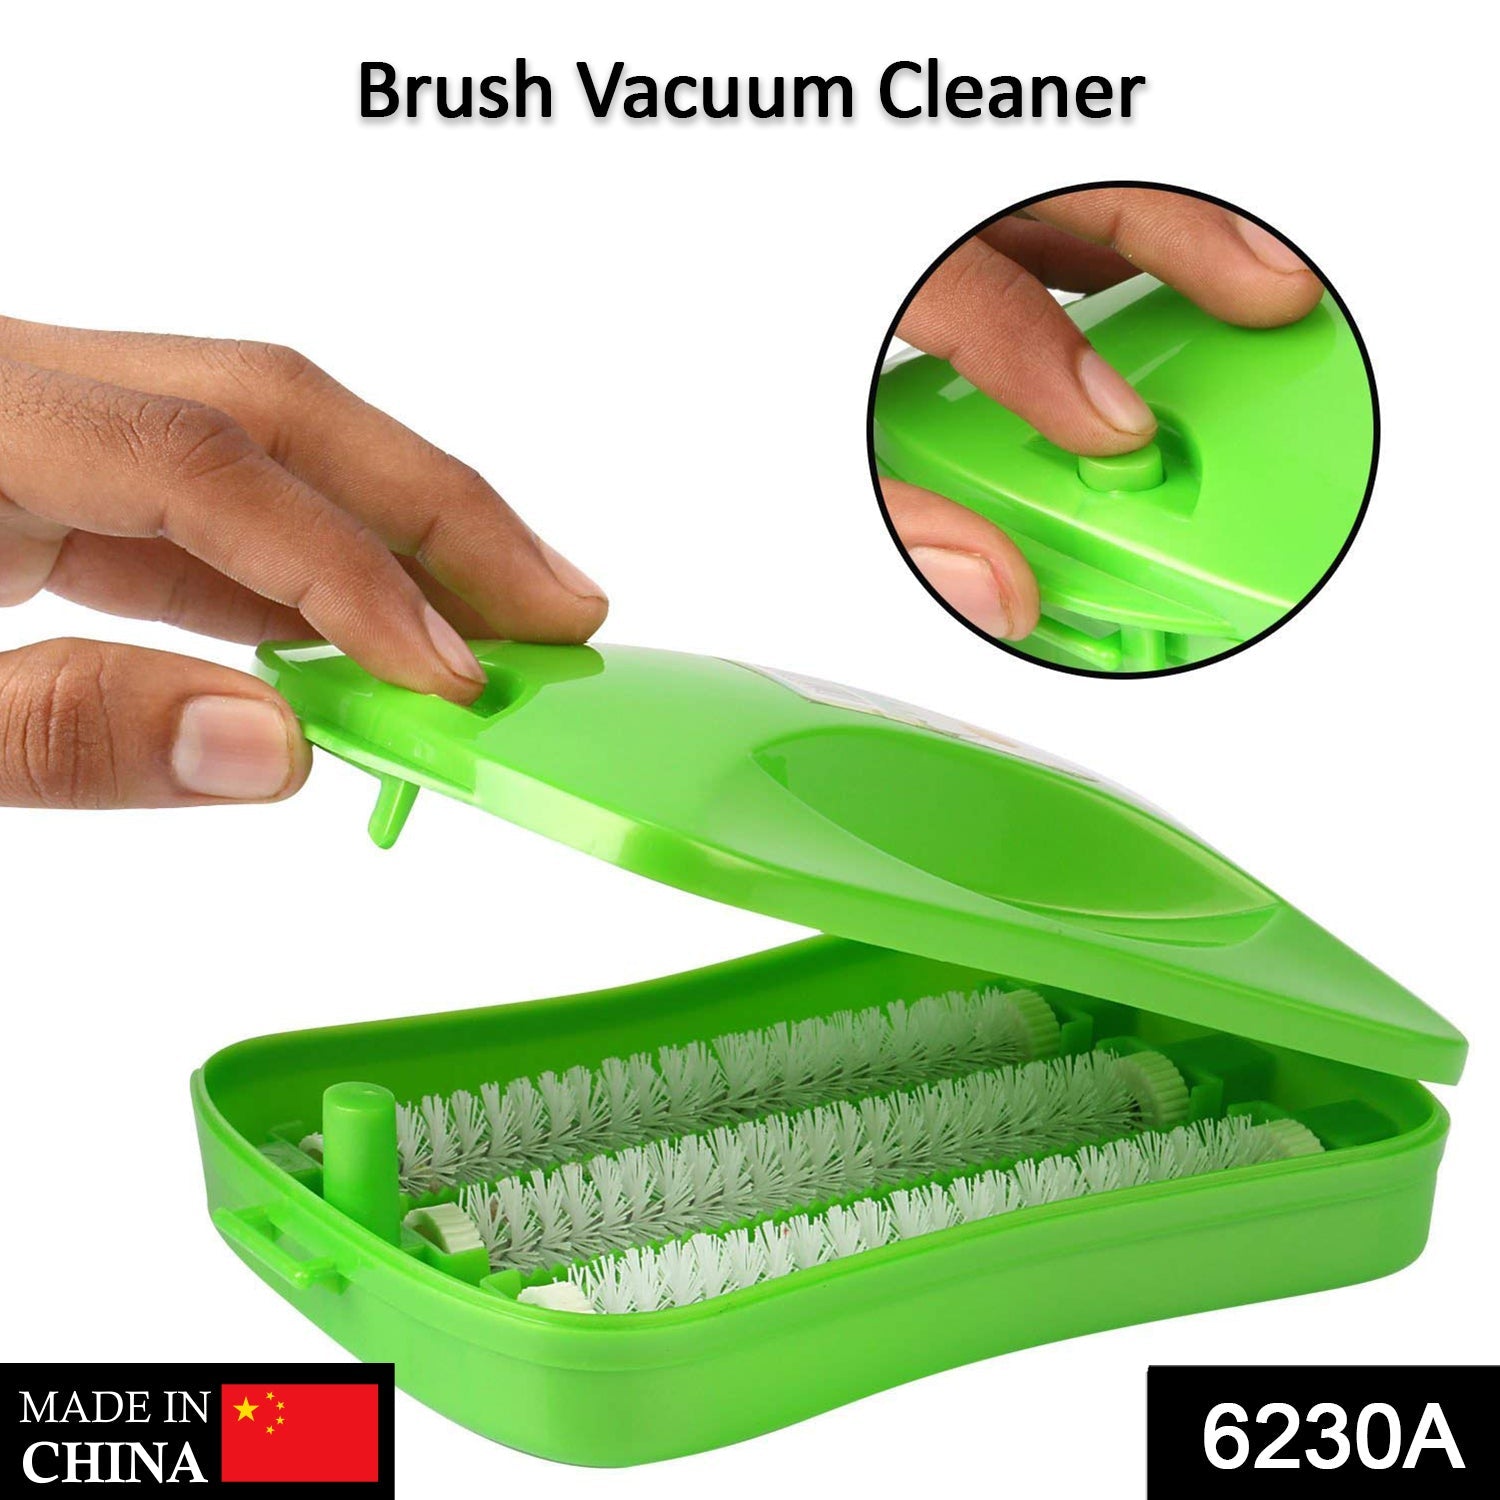 6230A Plastic Handheld Carpet Roller Brush Cleaning with Dust Crumb Collector, Wet, and Dry Brush DeoDap